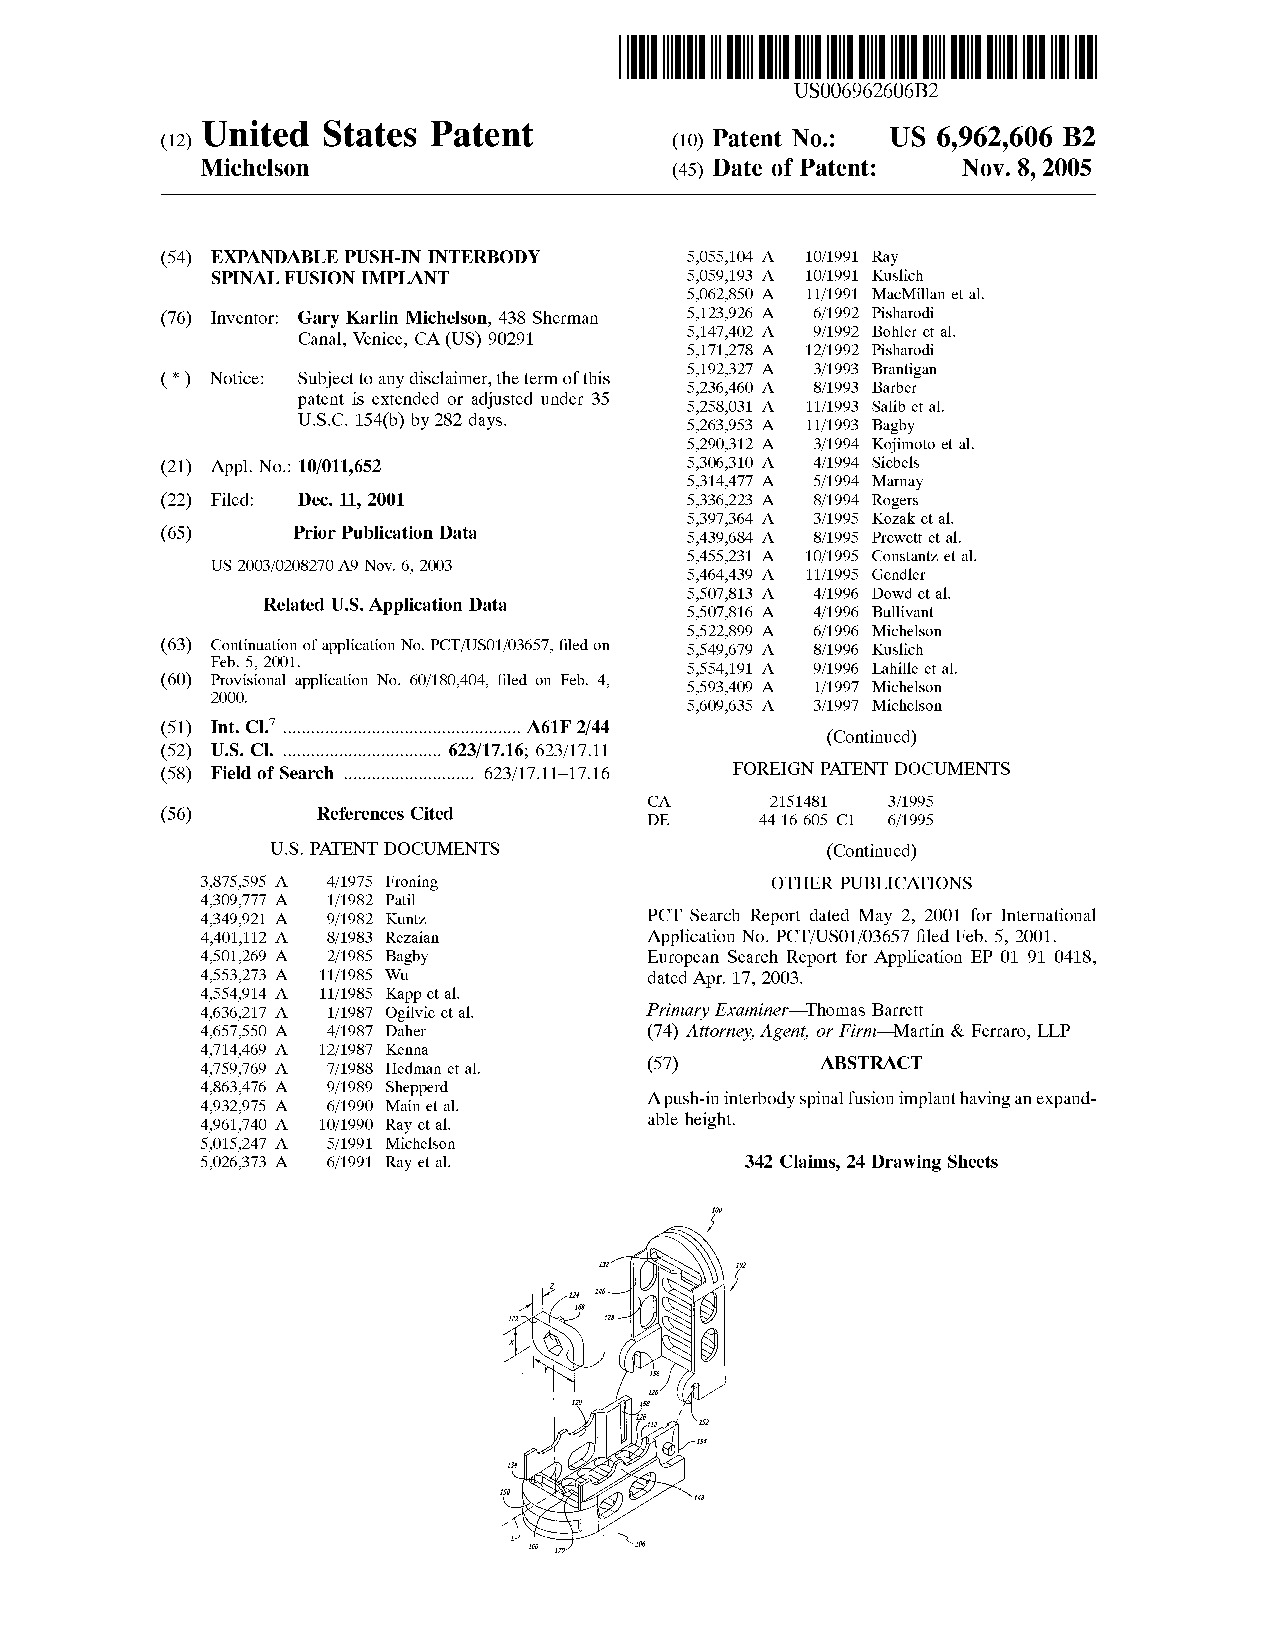 Expandable push-in interbody spinal fusion implant - Patent 6,962,606